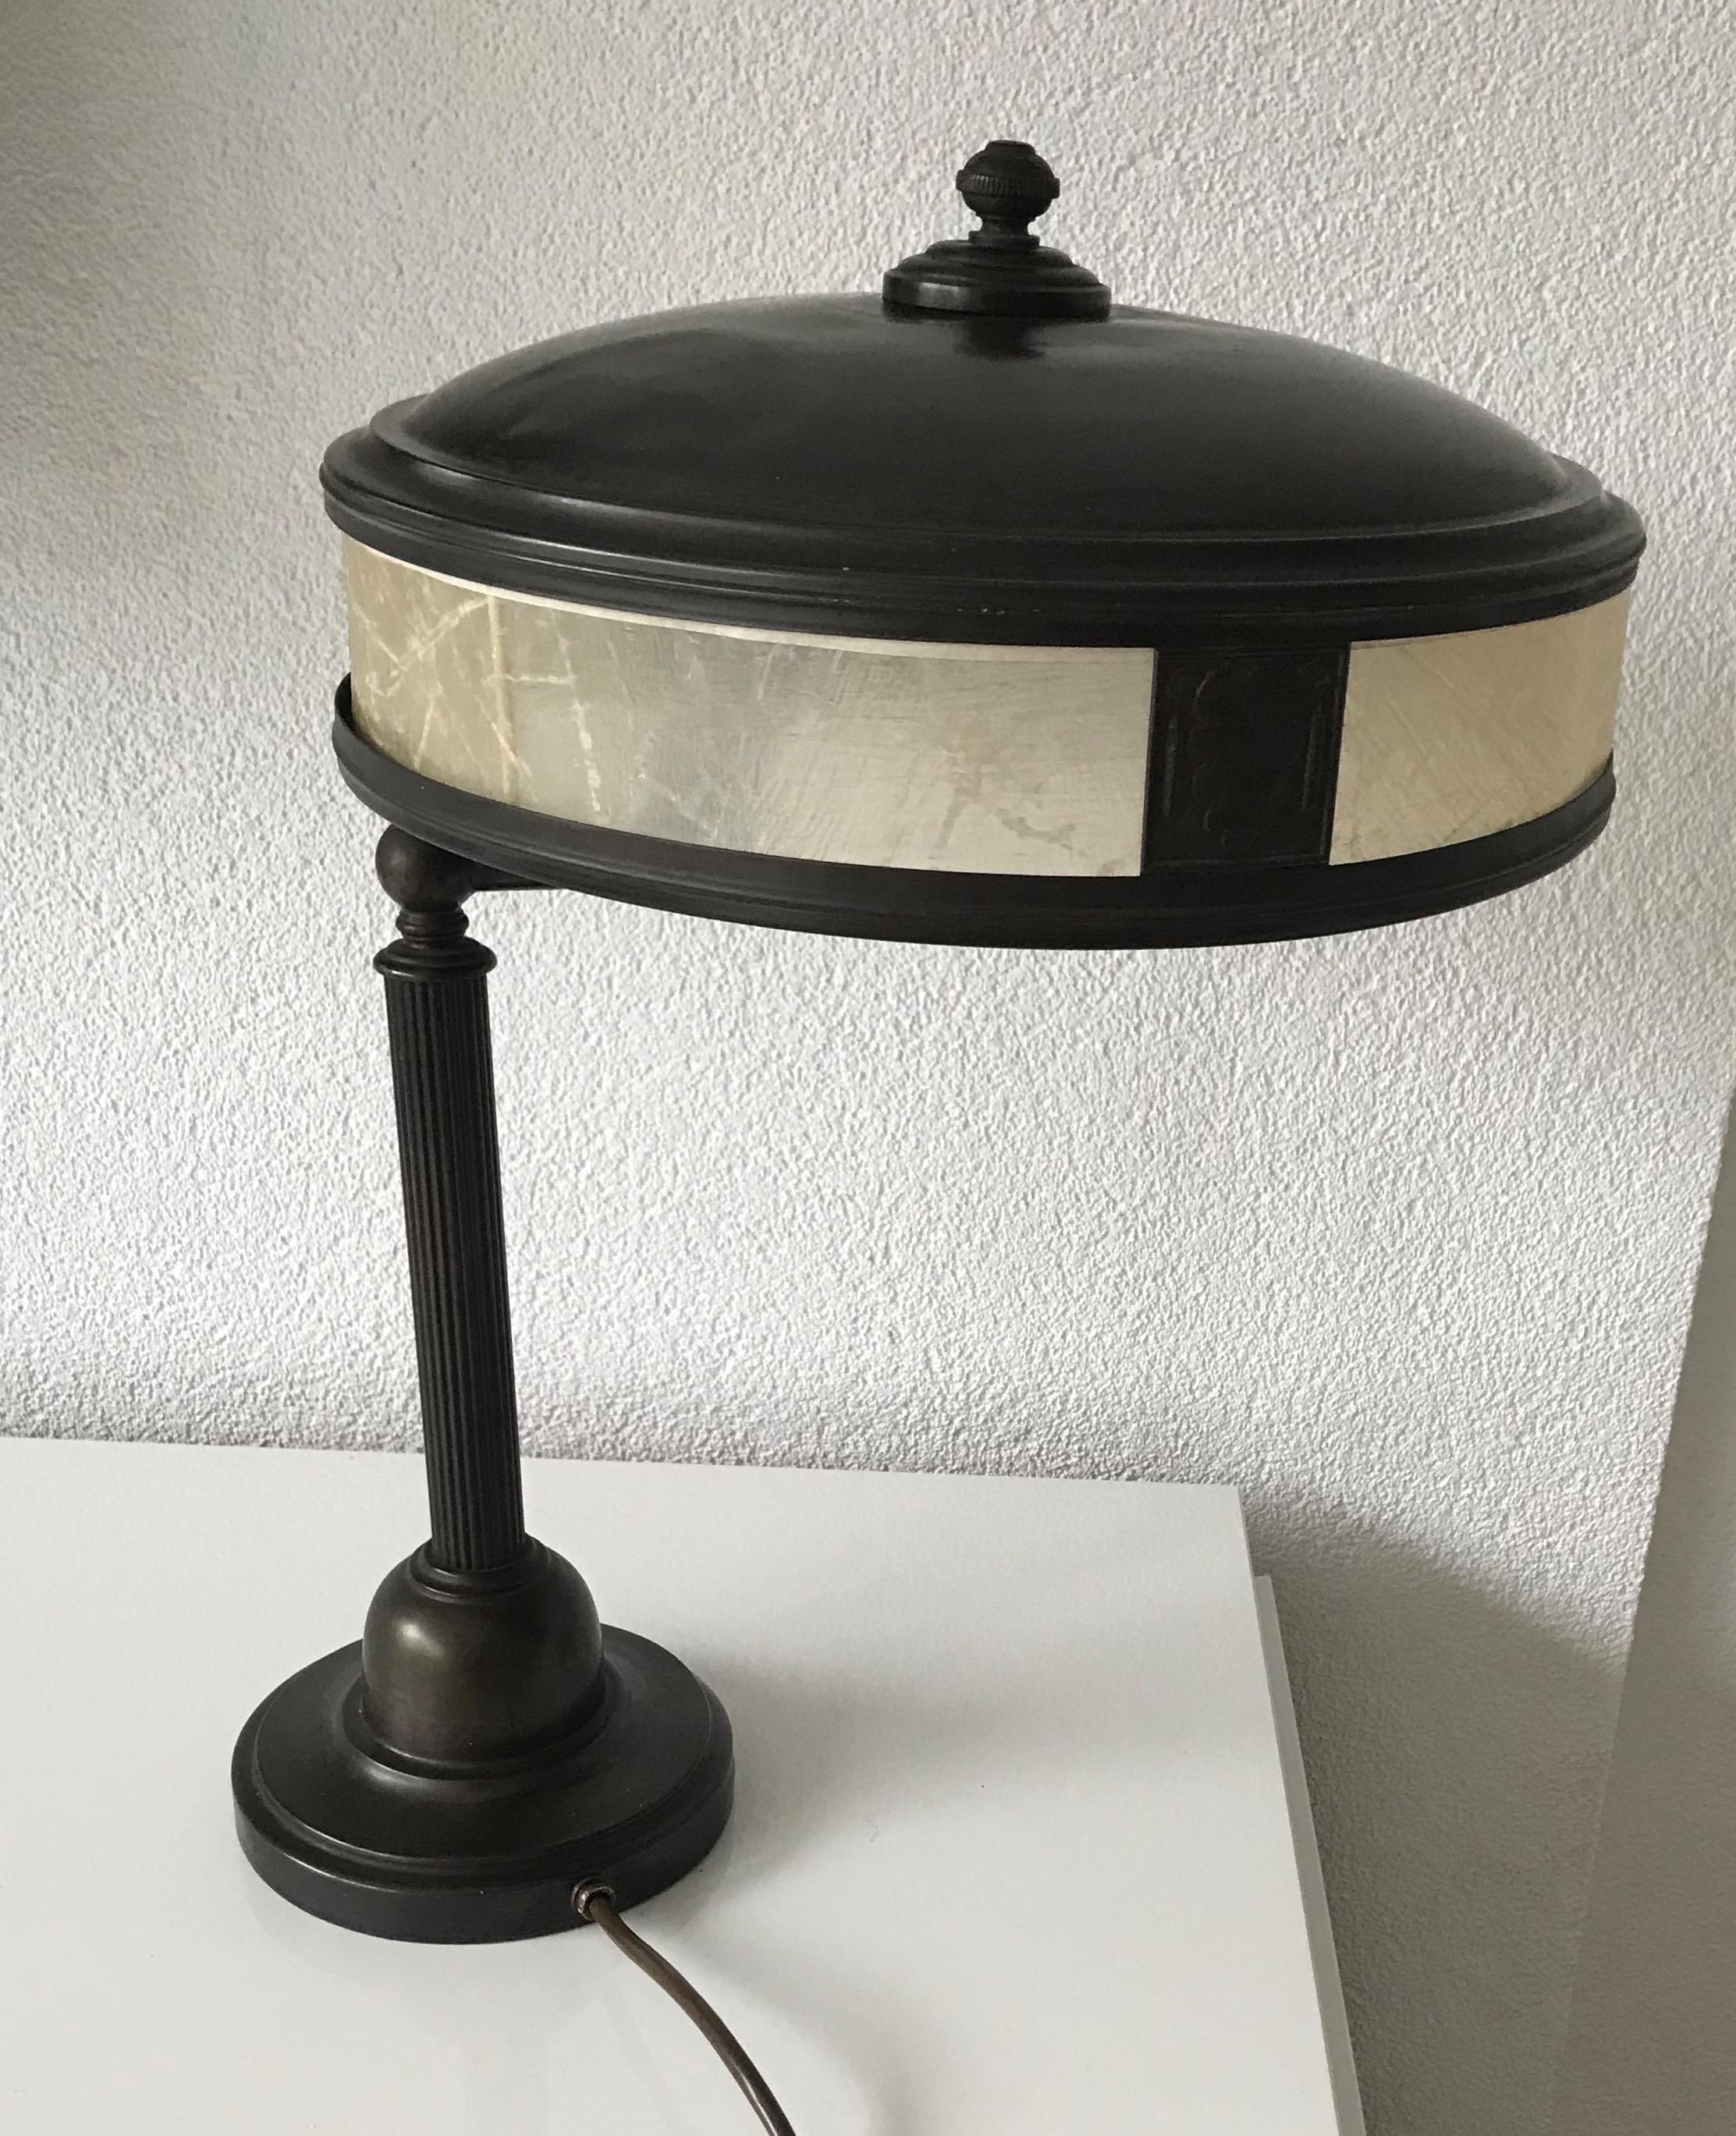 Highly stylish and timeless lamp for a desk or sidetable.

This German table lamp is from circa 1910-1920 and its stylish and timeless design will look beautiful in all kinds of interiors. Known for their quality and durability, German designs and